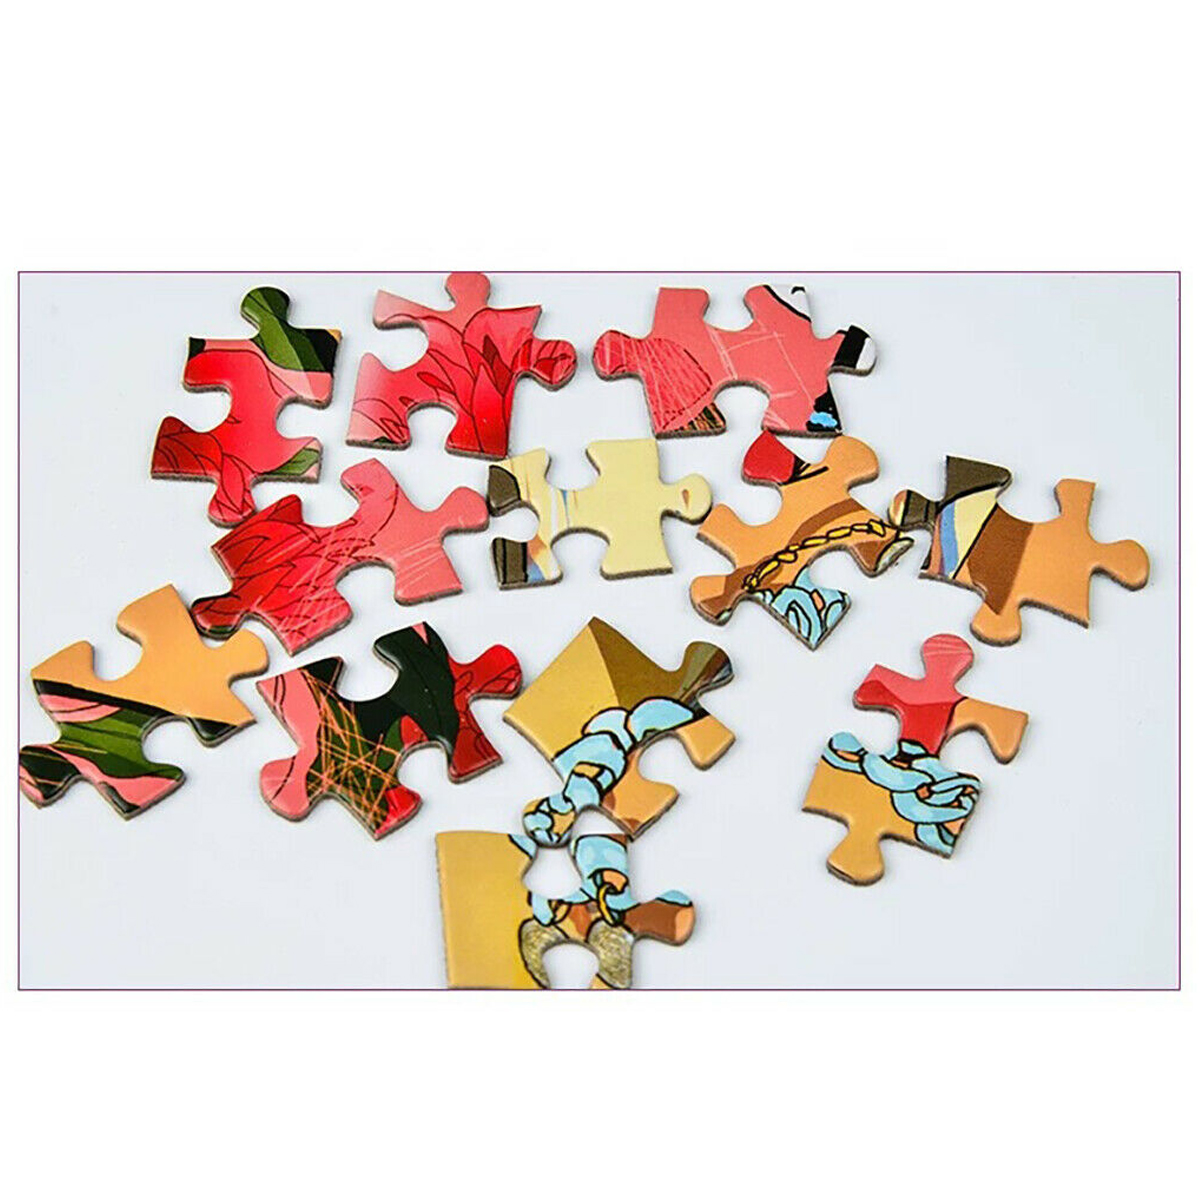 1000-Piece-Jigsaw-Puzzle-Toy-DIY-Assembly-Cardboard-Landscapes-Decompression-Game-Puzzle-Toy-1678197-6